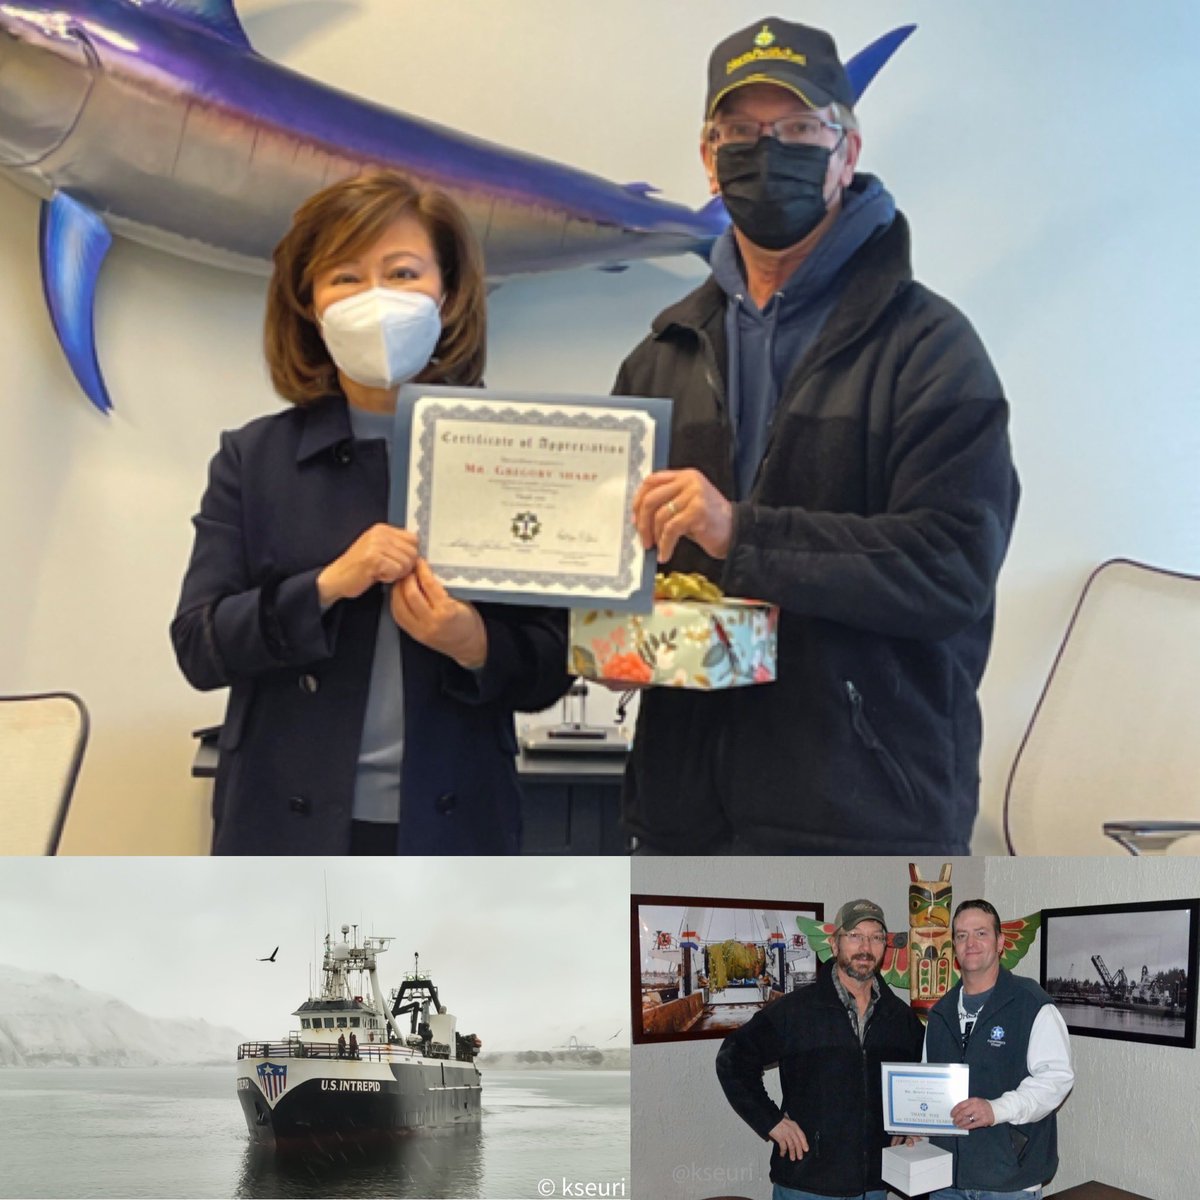 Pride in profession: recognizing 23 year crew Greg Sharp bit.ly/gregSharp
Fish-processor - Deckhand - Assistant Engineer - #USCG Chief Engineer. Keep up the good work - I’m proud to work with you, Greg and I know Ms. Park (CEO) and Monty (21 year processor - chief steward